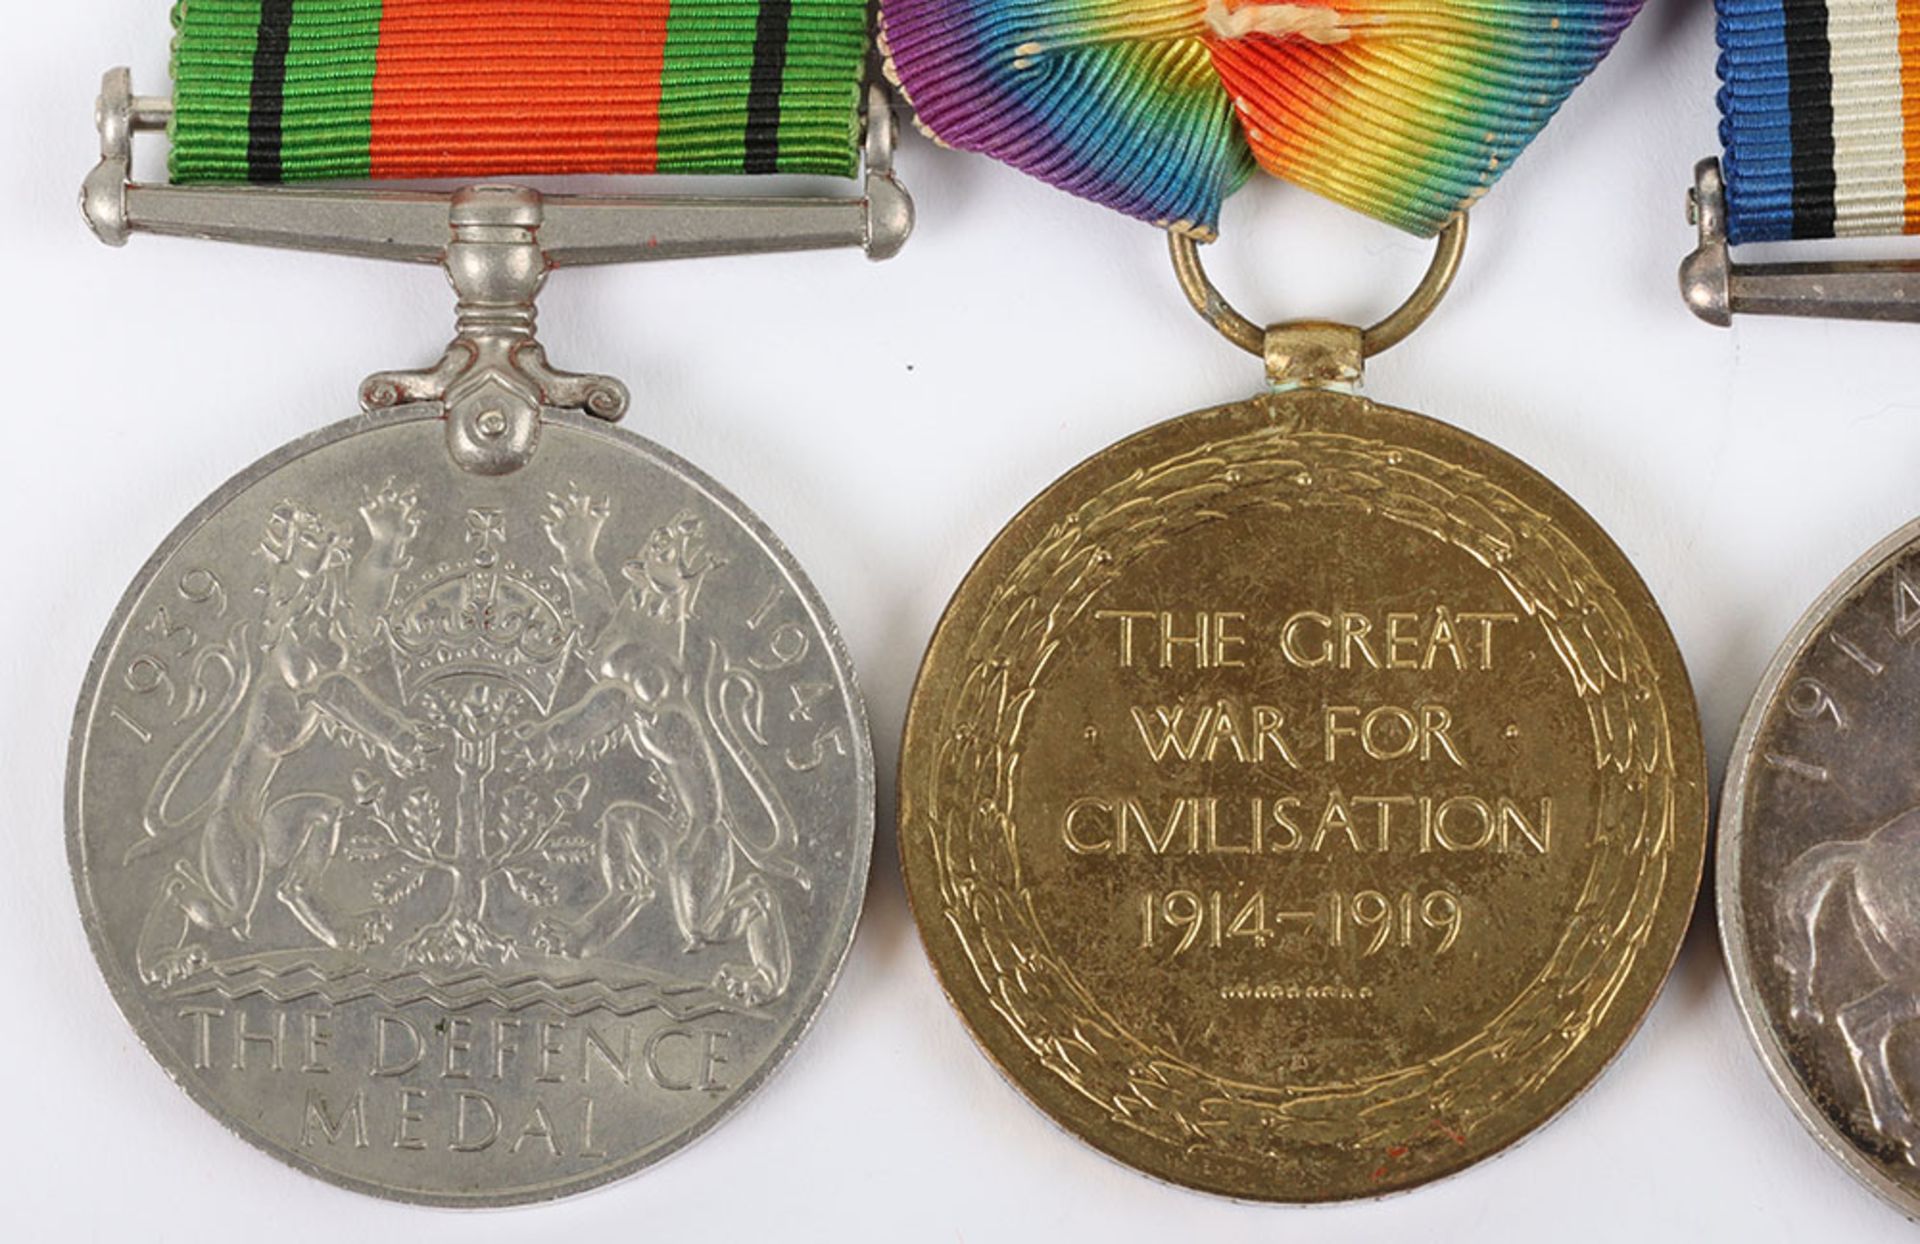 A Group of 4 medals for service in both World Wars to a recipient who was mentioned in despatches du - Image 7 of 7